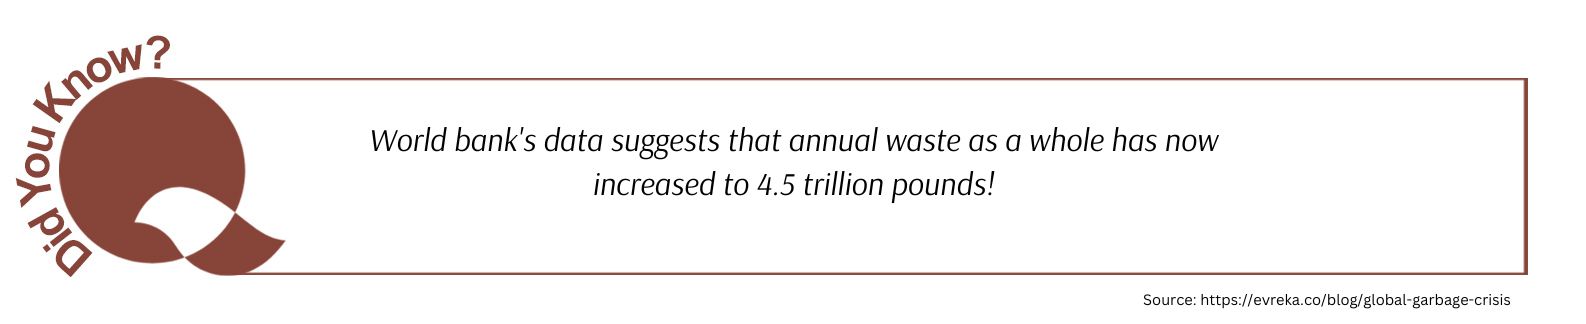 World bank's data suggests that annual waste as a whole has now increased to 4.5 trillion pounds.